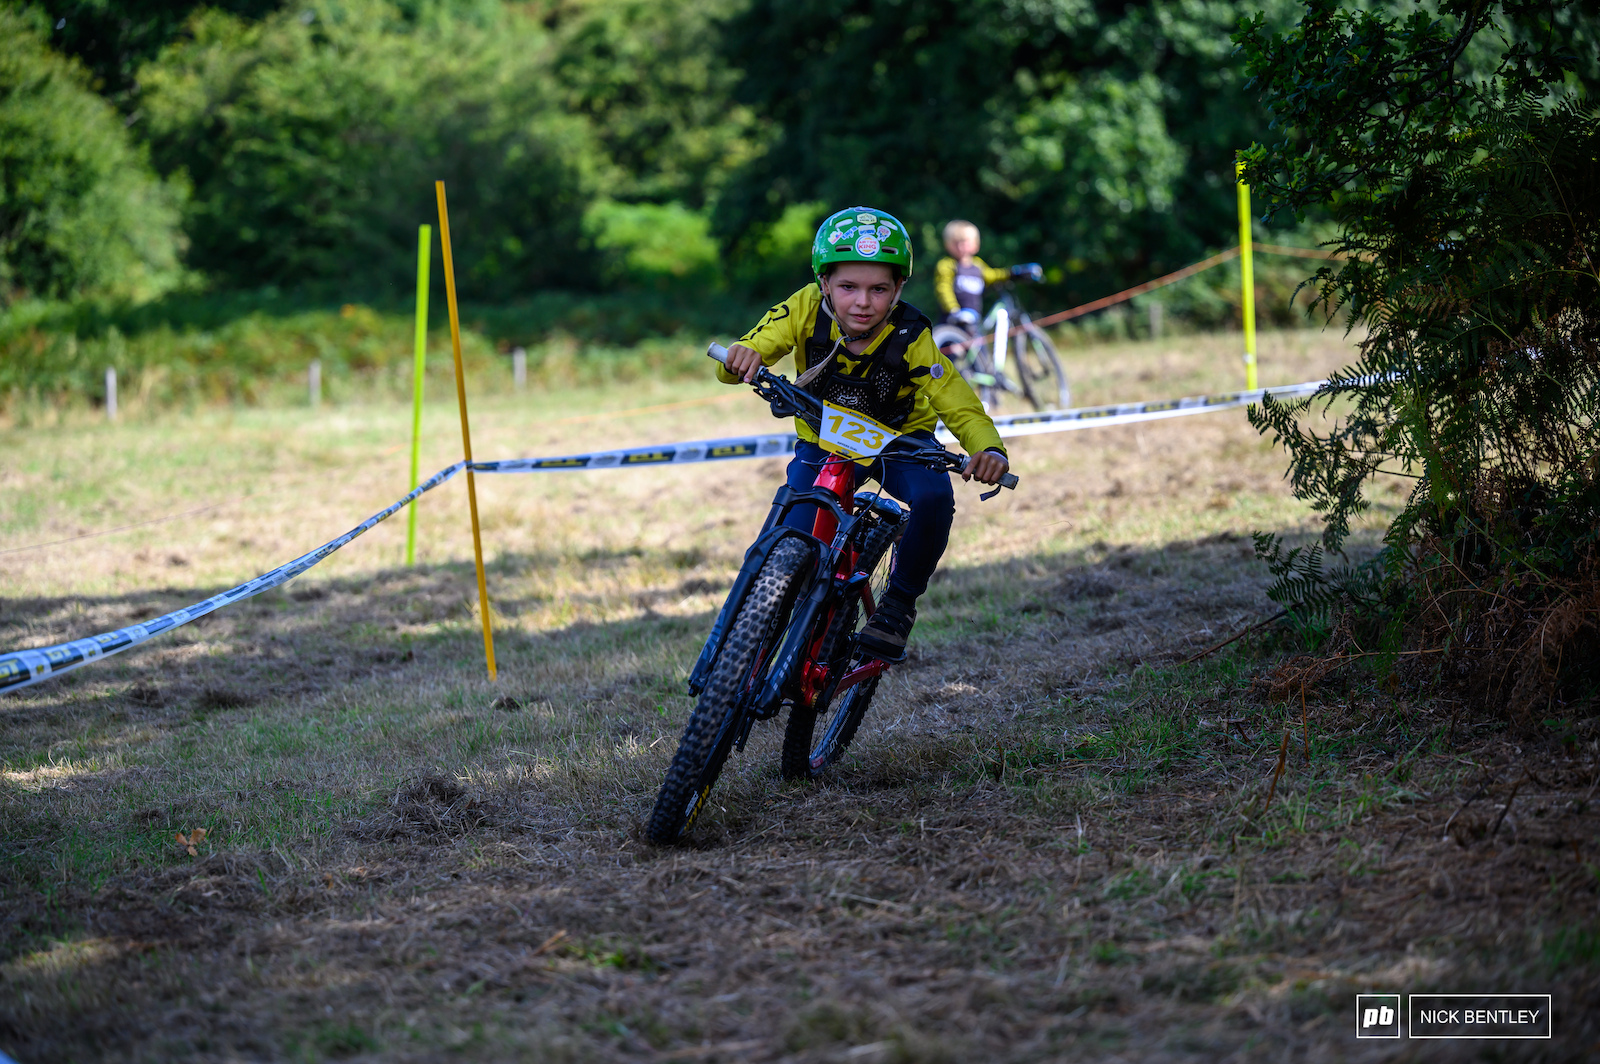 The Rippers showed how it is done in Dual Slalom keeping it pinned in the corners